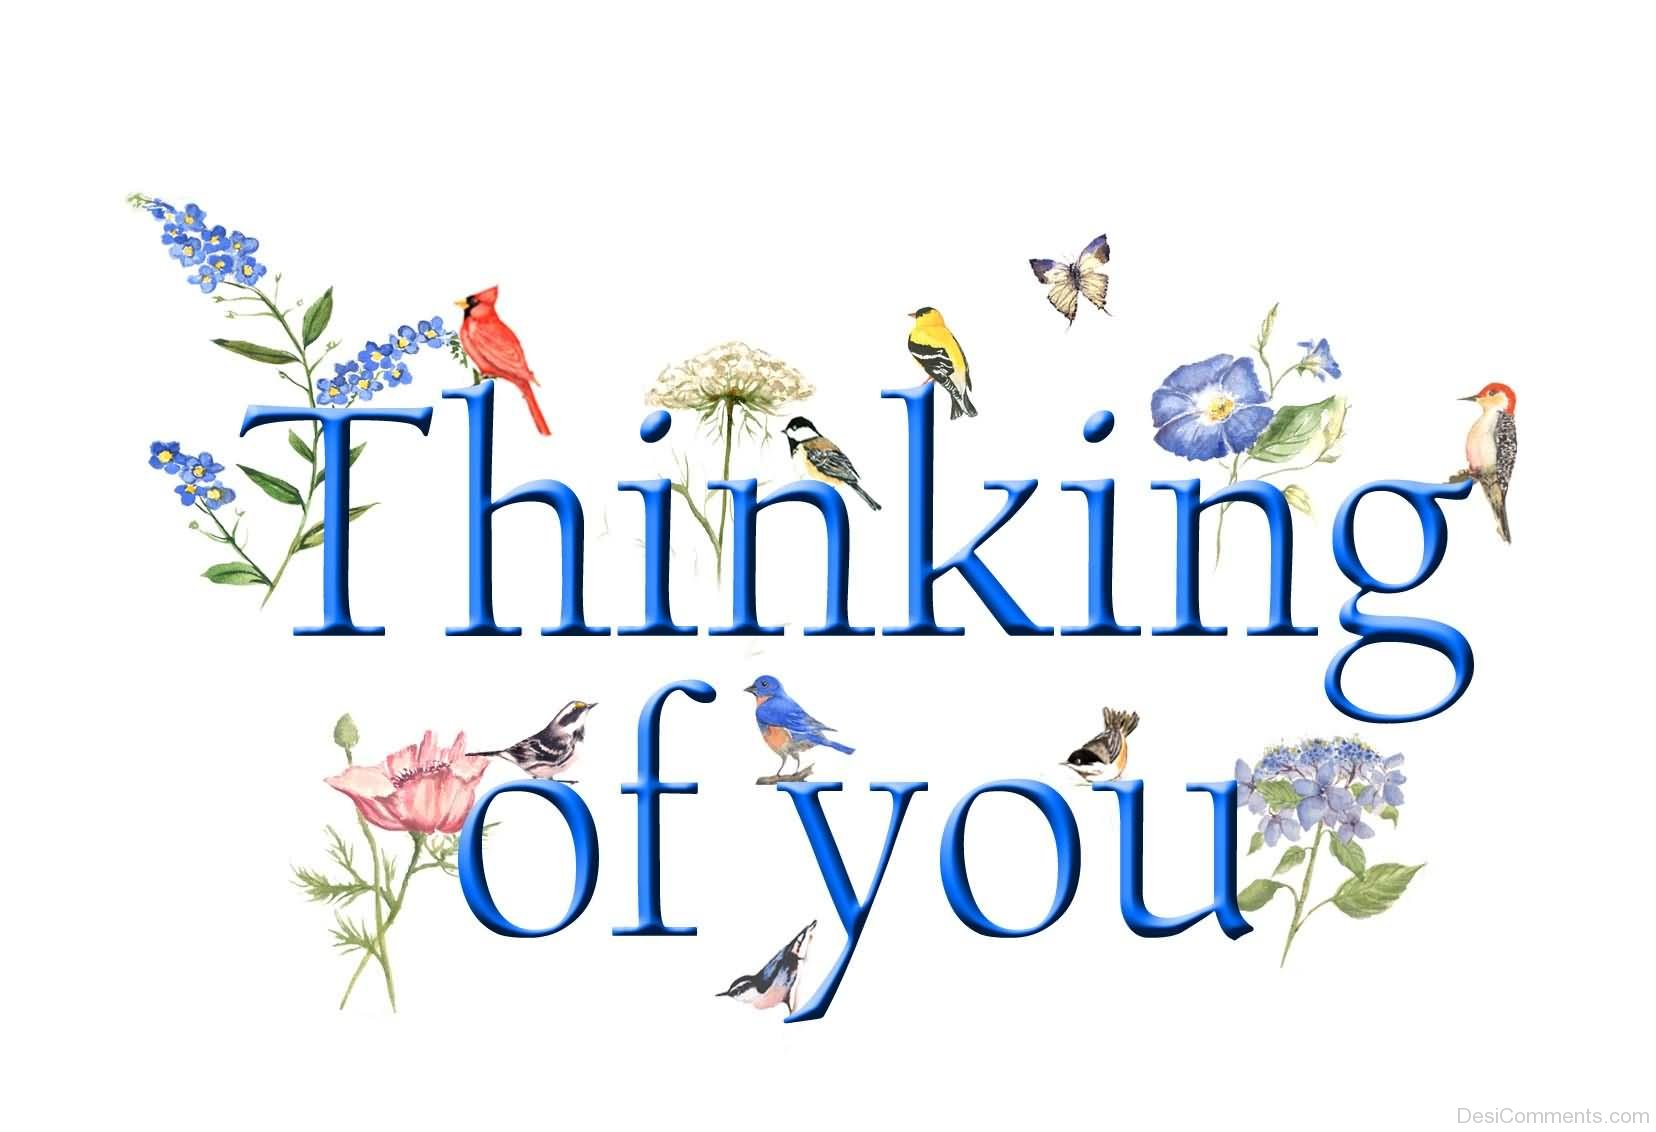 Thinking Of You Wallpapers